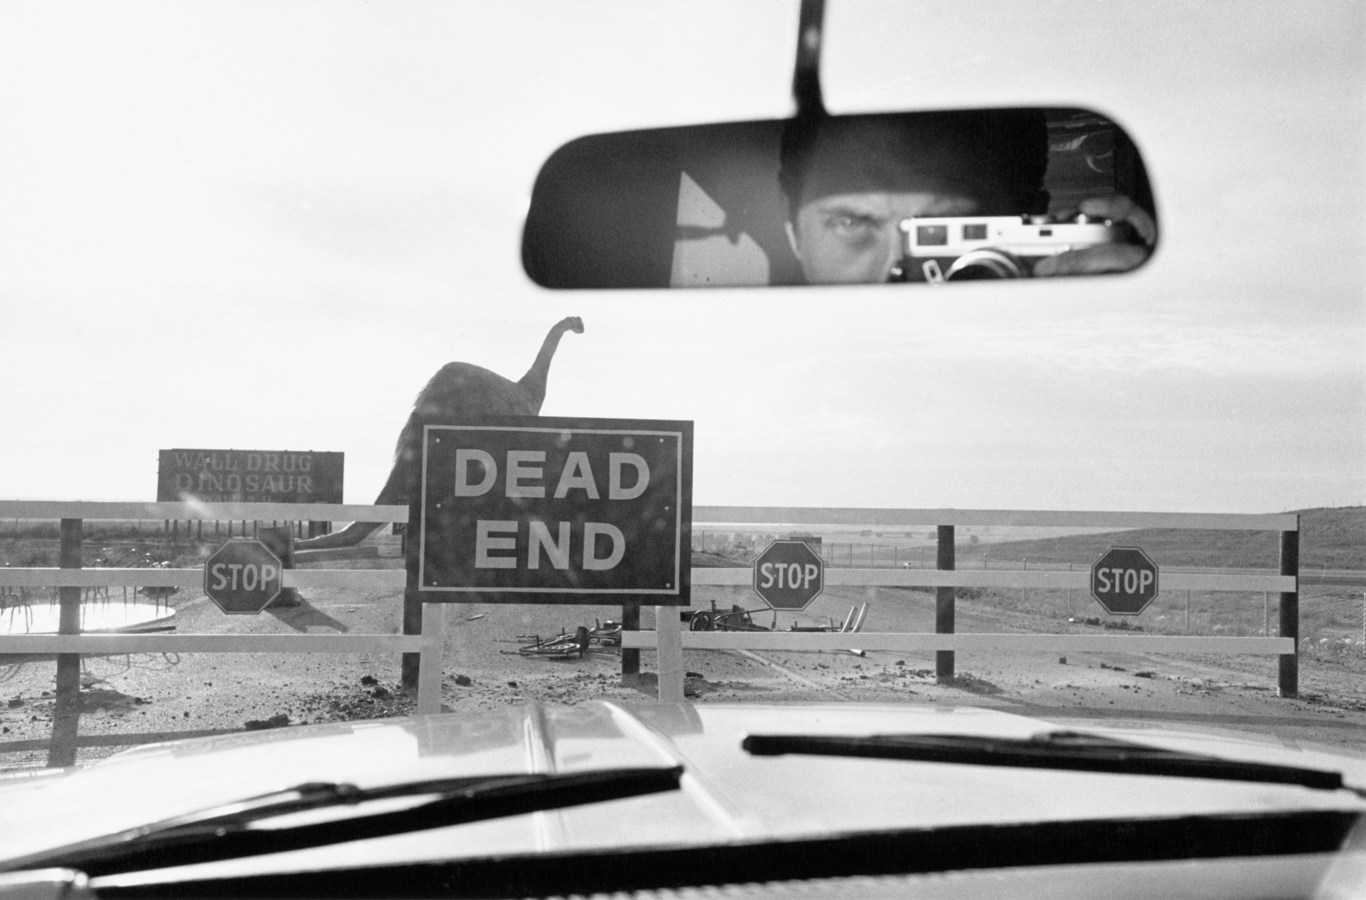 Black and white photograph of sign reading "Dead End" taken from interior of car with large dinosaur in empty desert in background